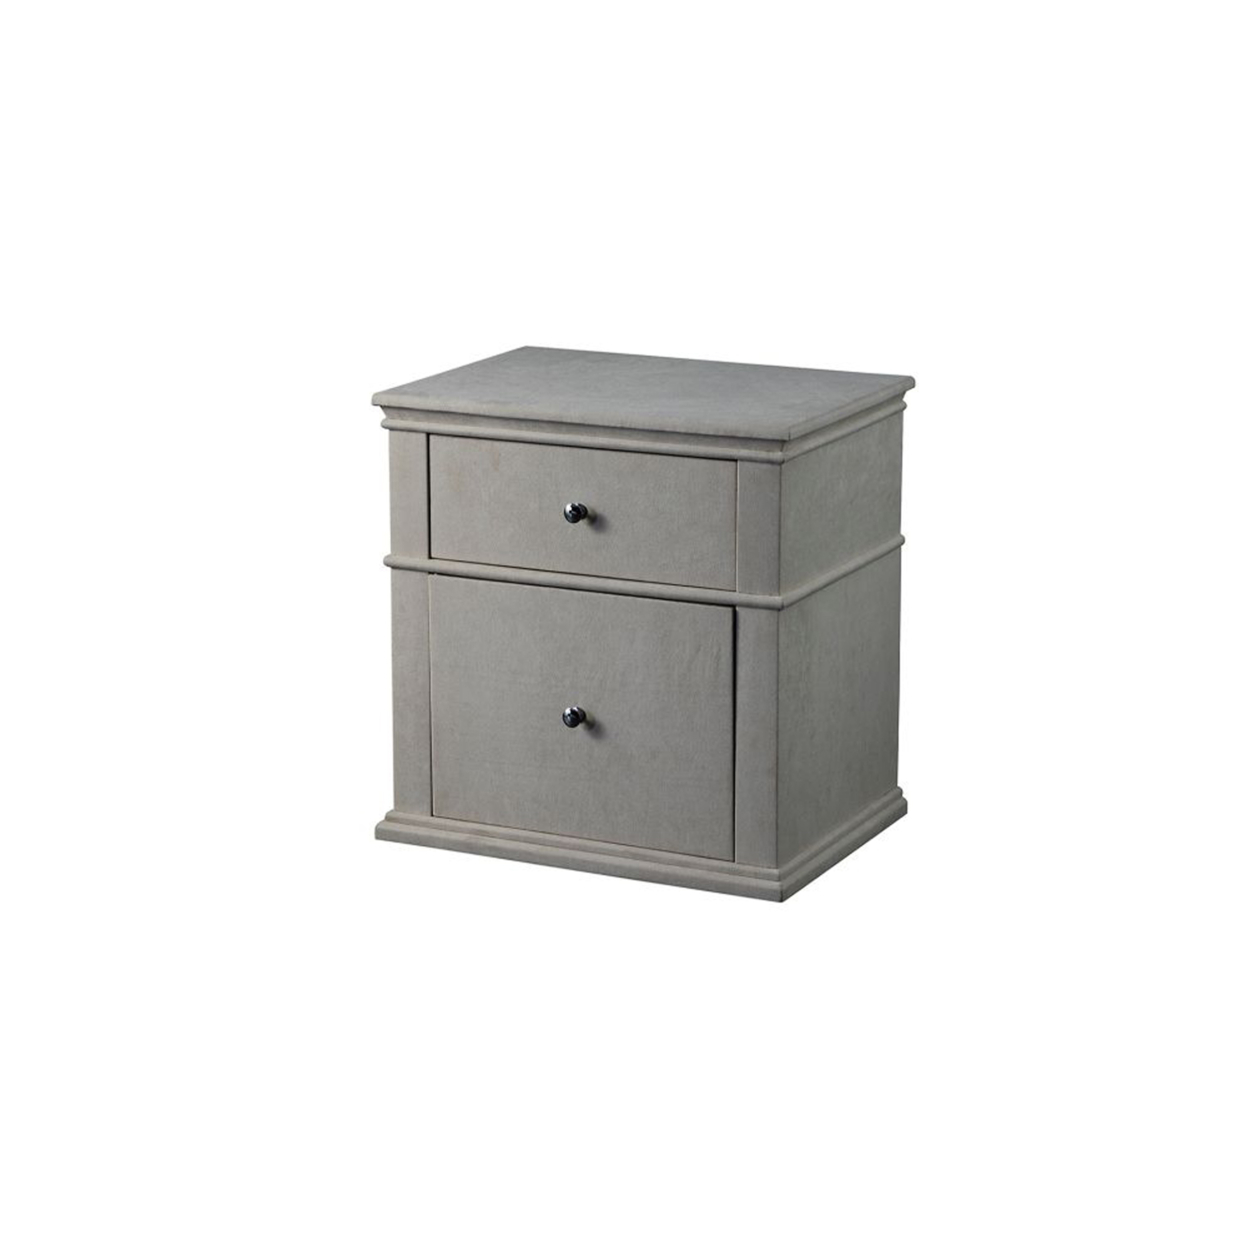 Spacious Fabric Upholstered Wooden Nightstand With Two Drawers, Light Gray- Saltoro Sherpi